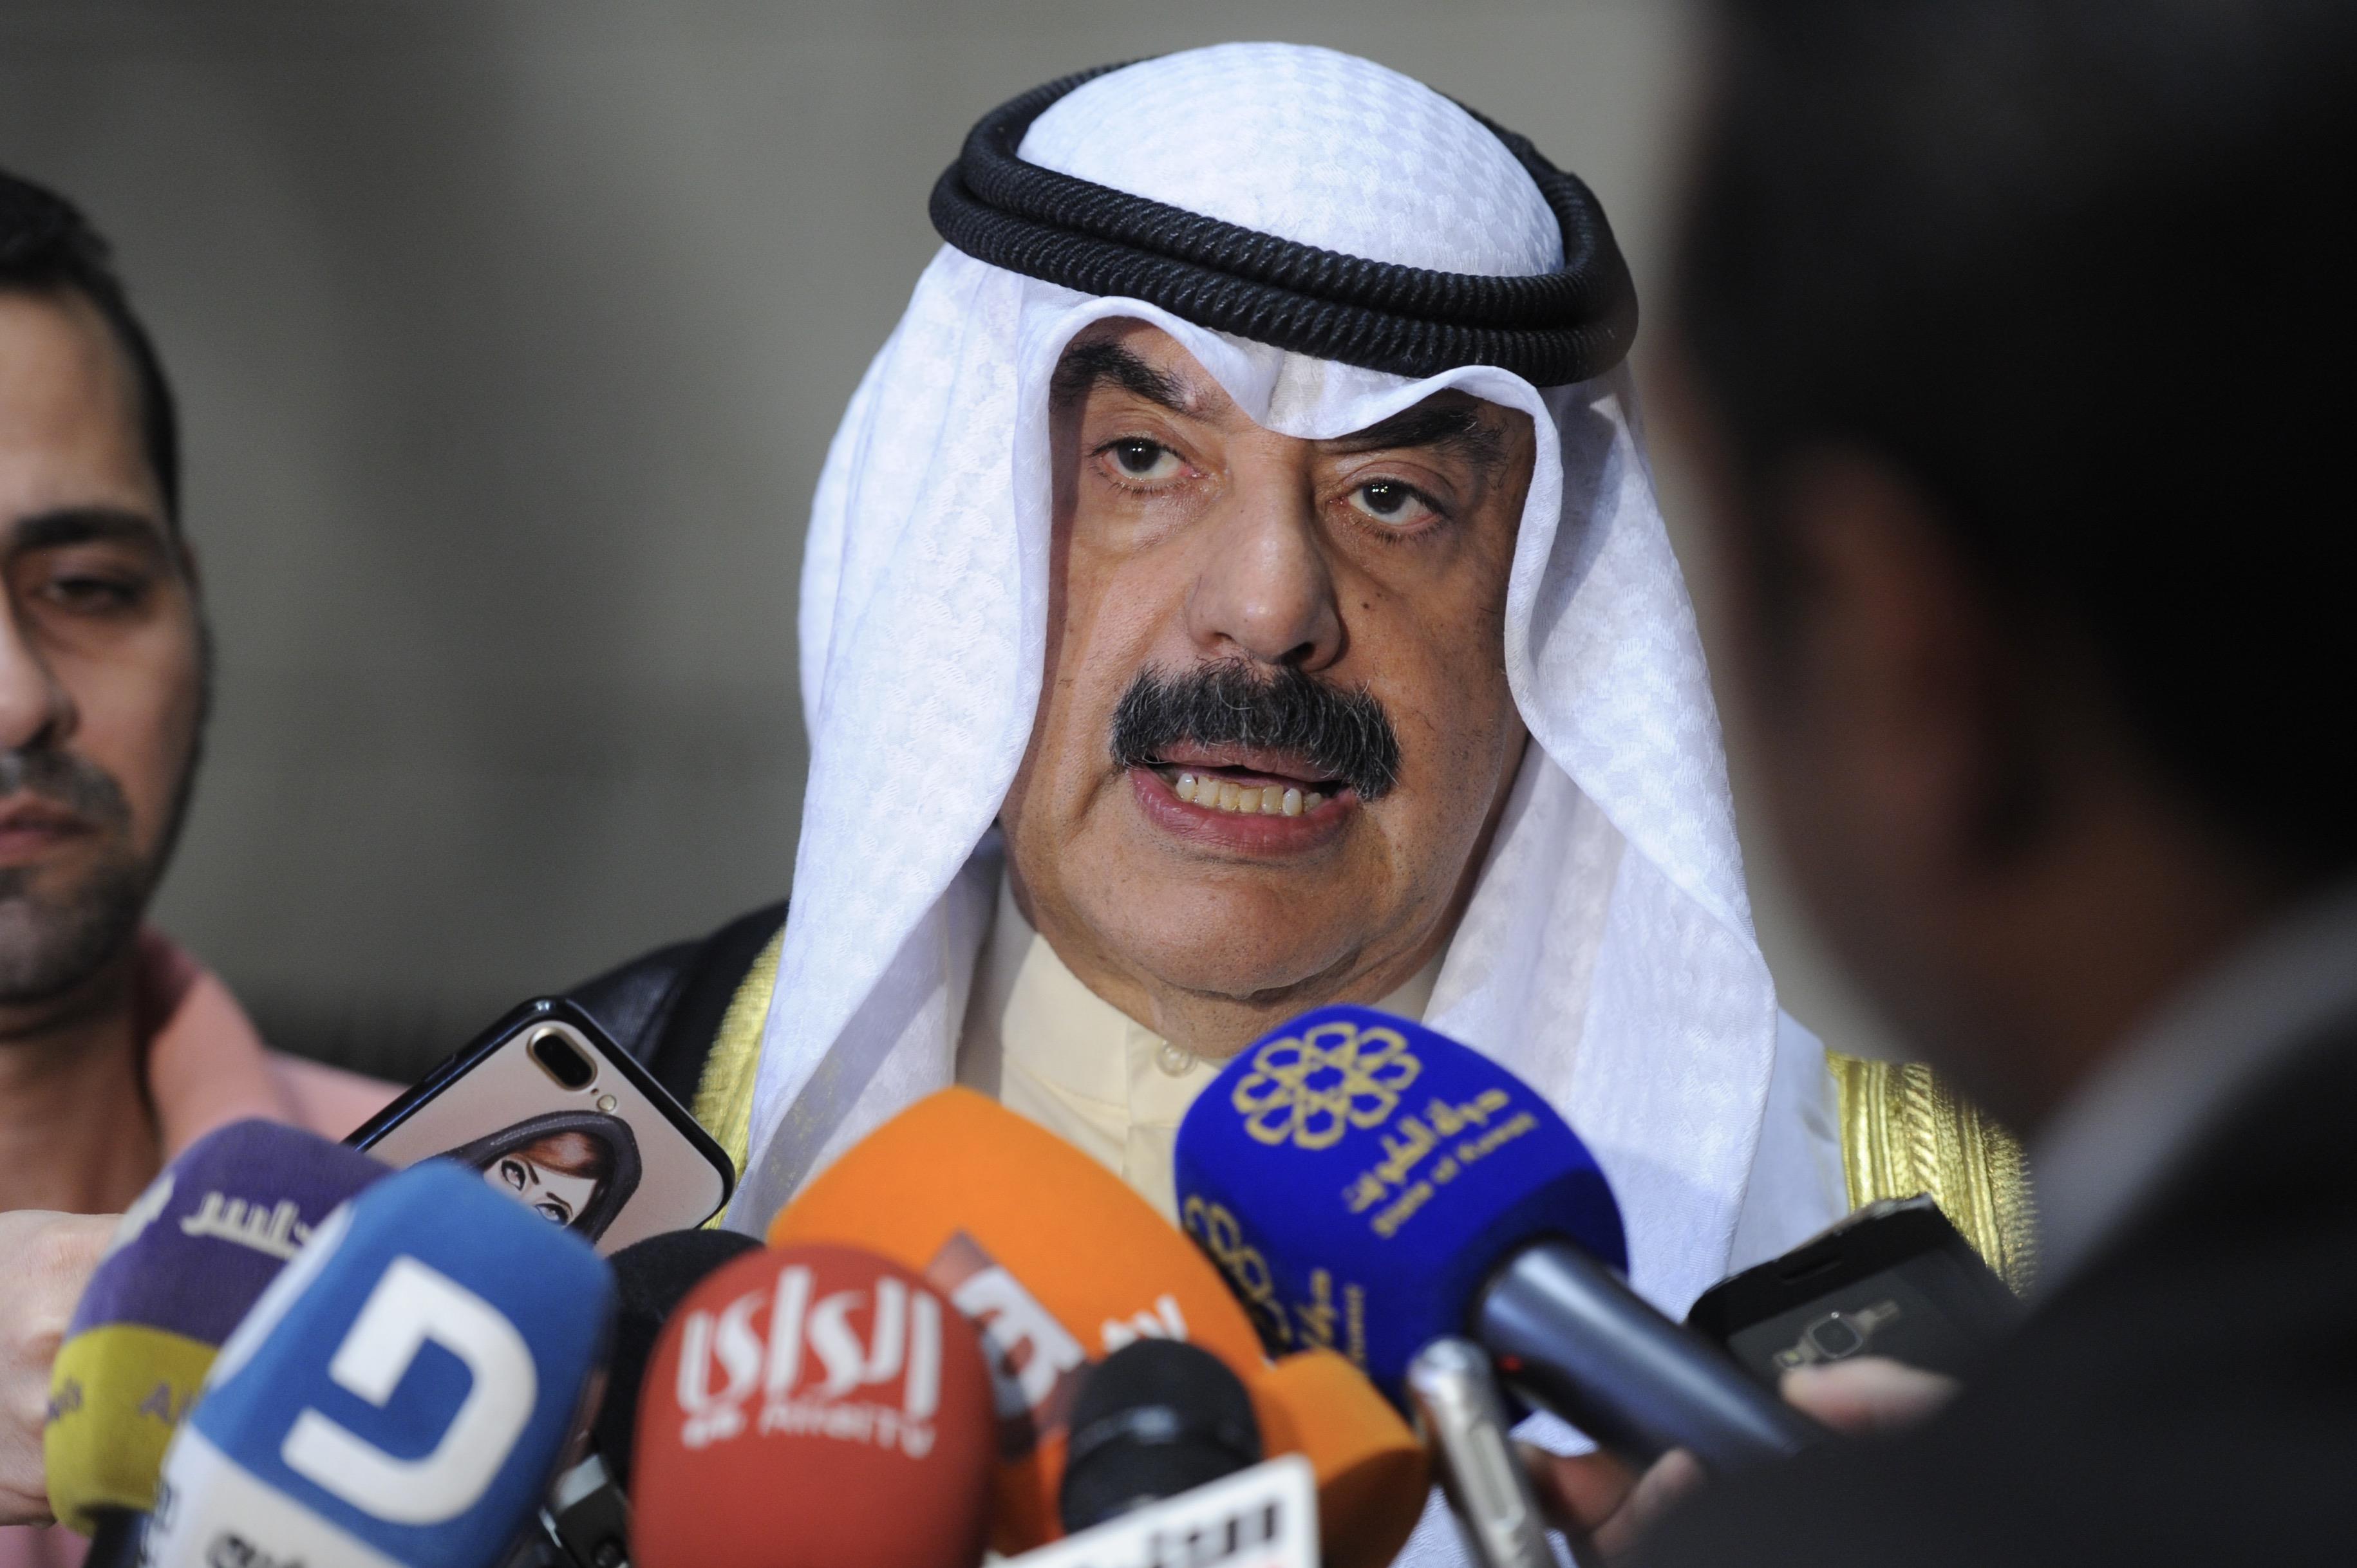 Kuwait intends to start new negotiations with Iraq to demarcate borders